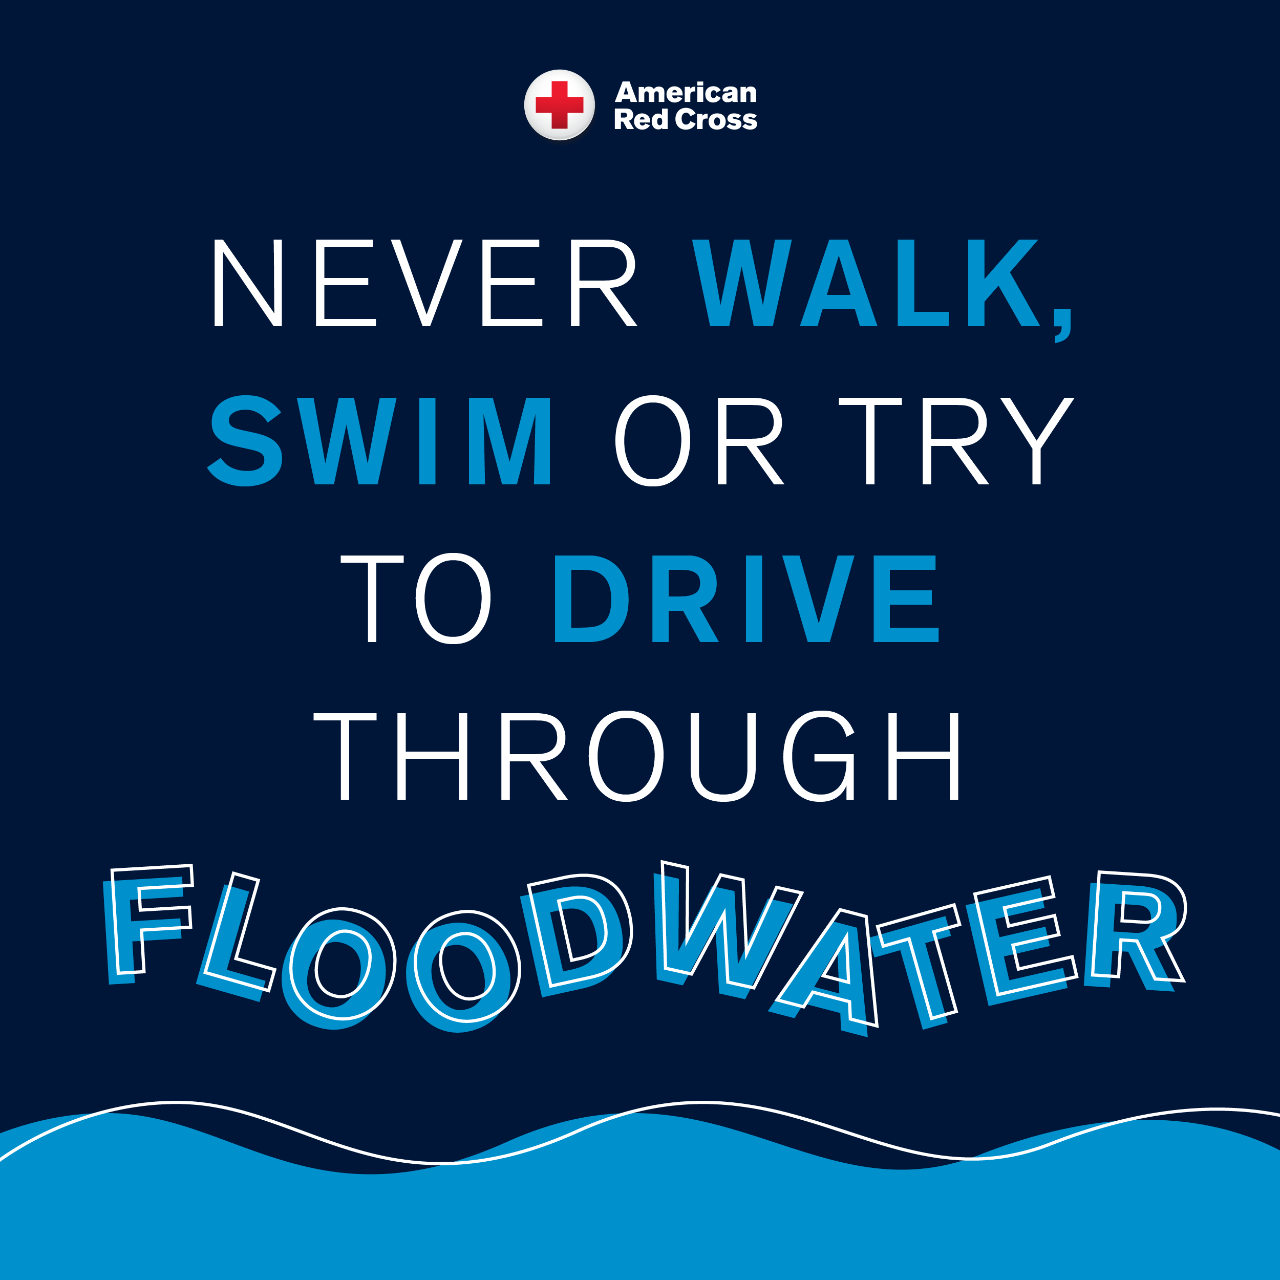 Never walk, swim or try to drive through flood waters